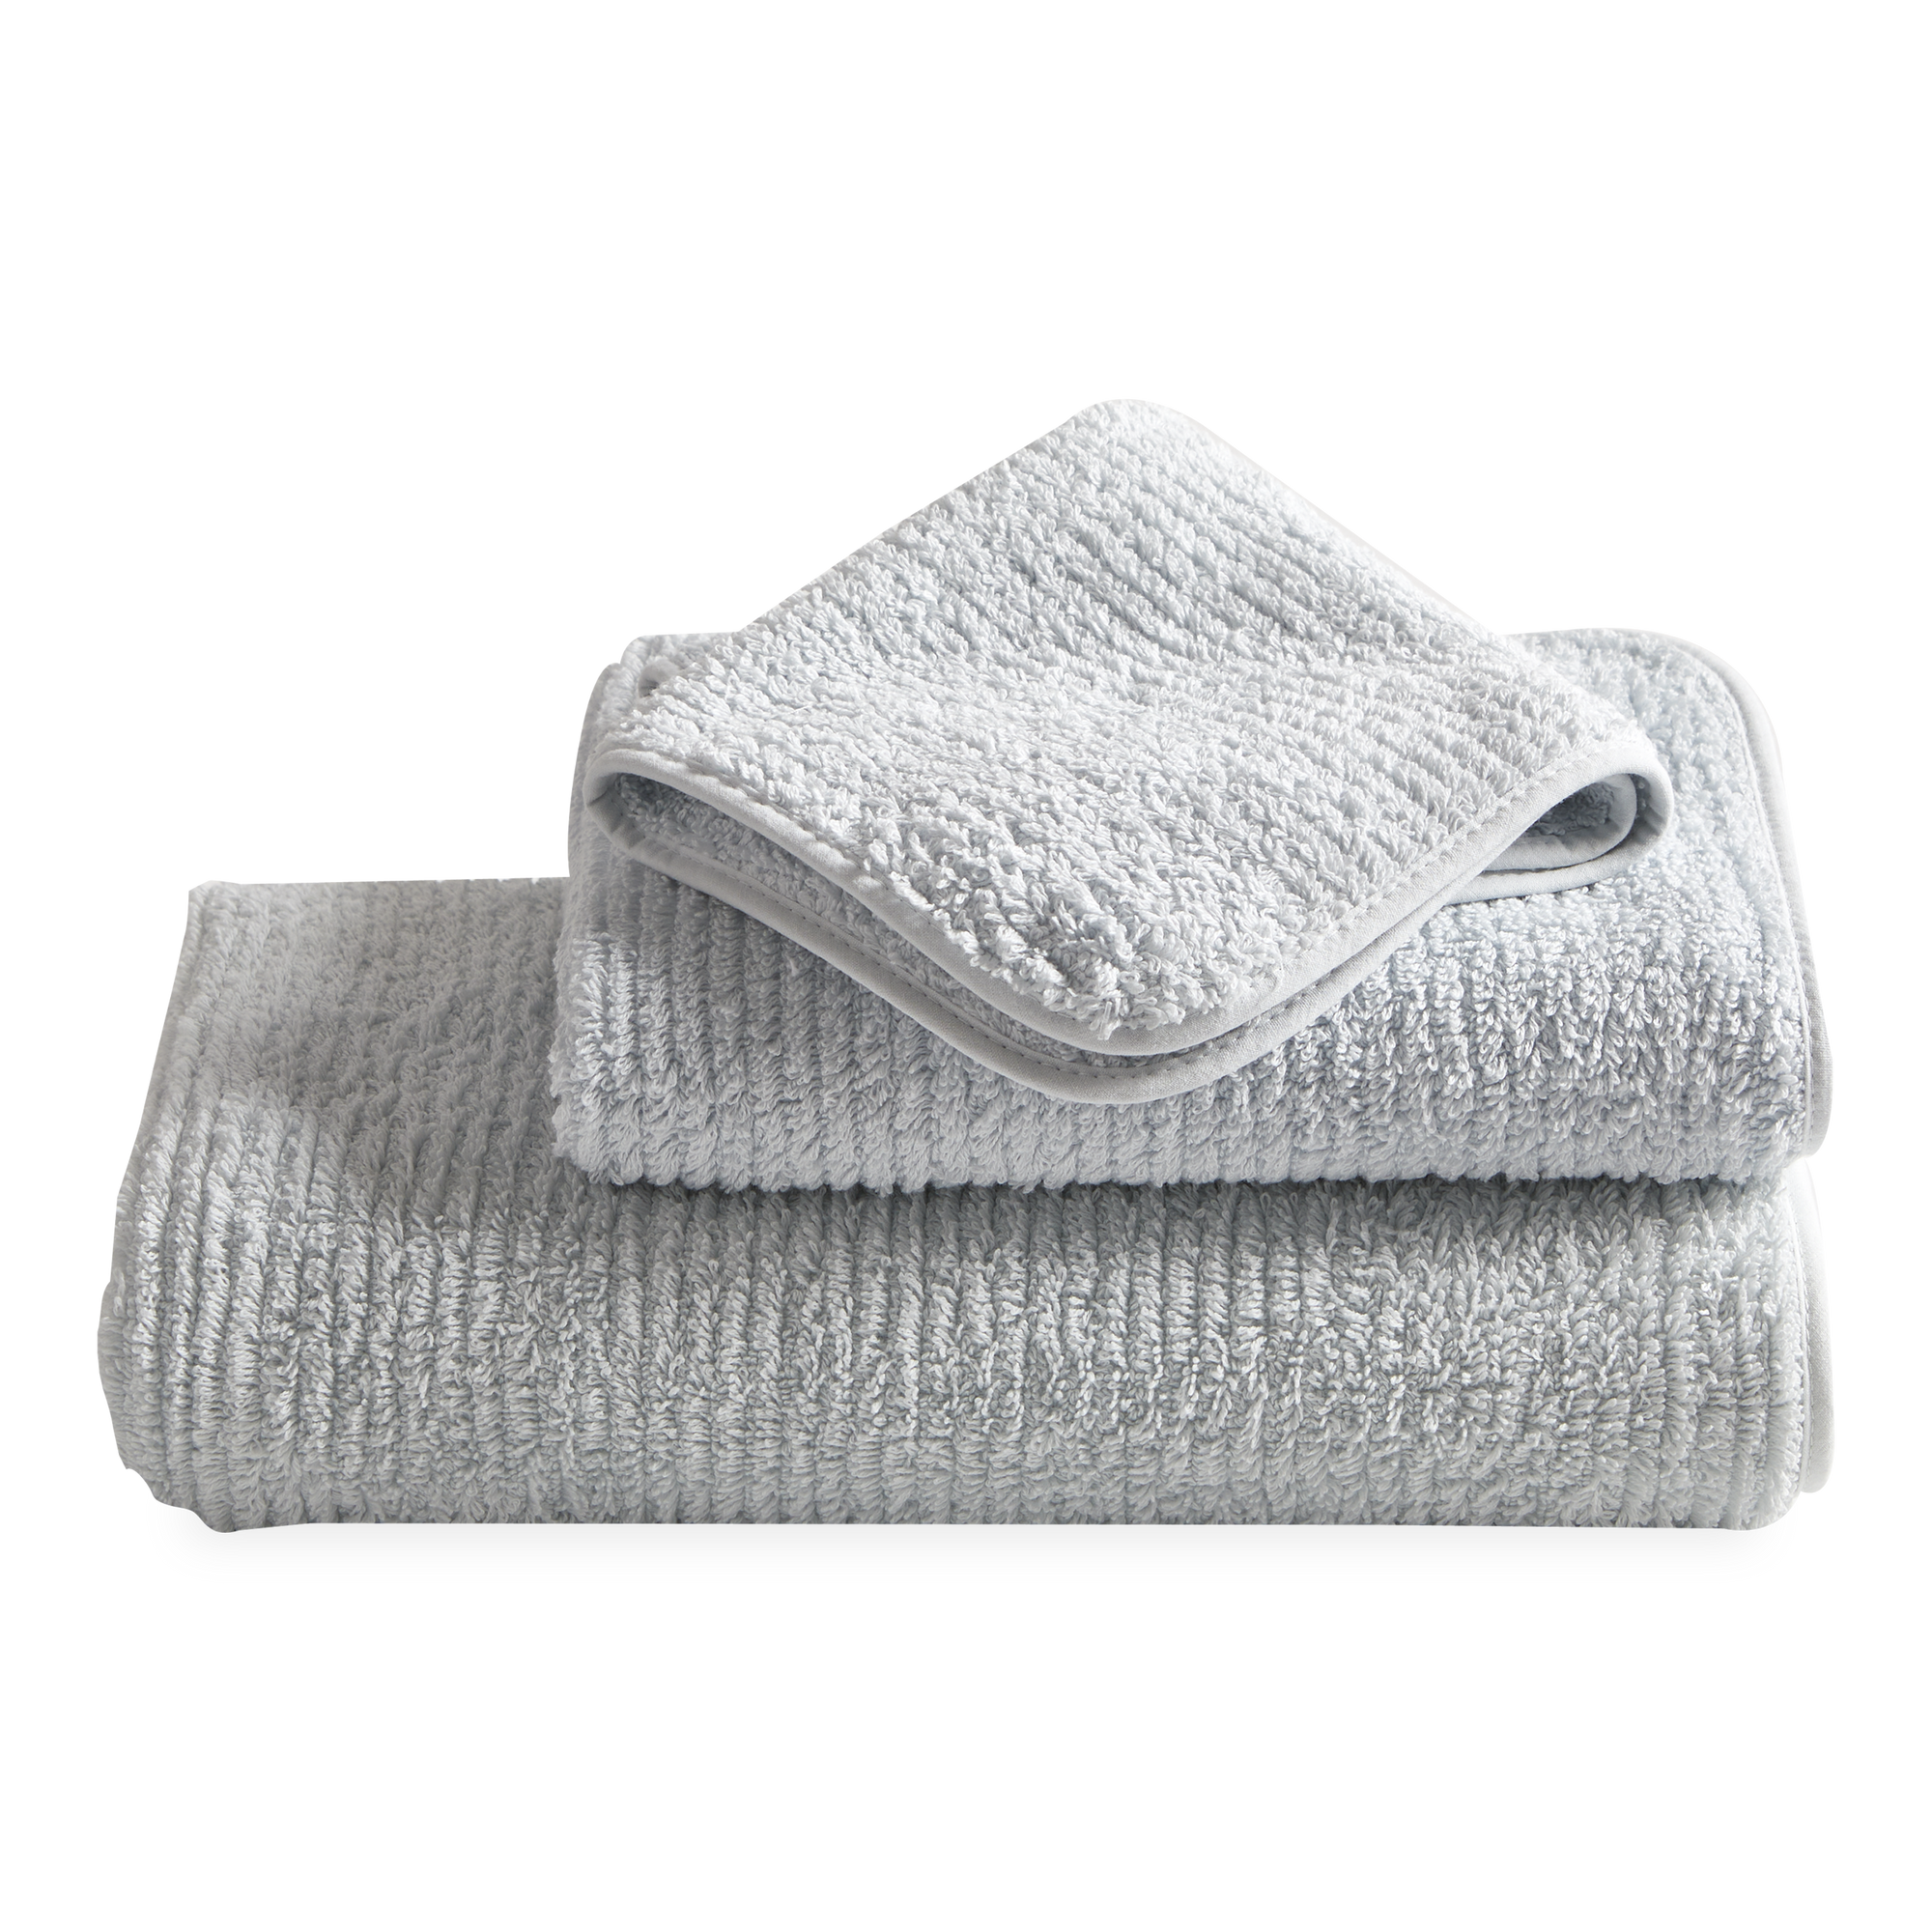 Carefully woven with a soft long pile, the Hammam Textured towels are lusciously thick with textured lines on the surface and are finished with a piped edge for subtle detail.